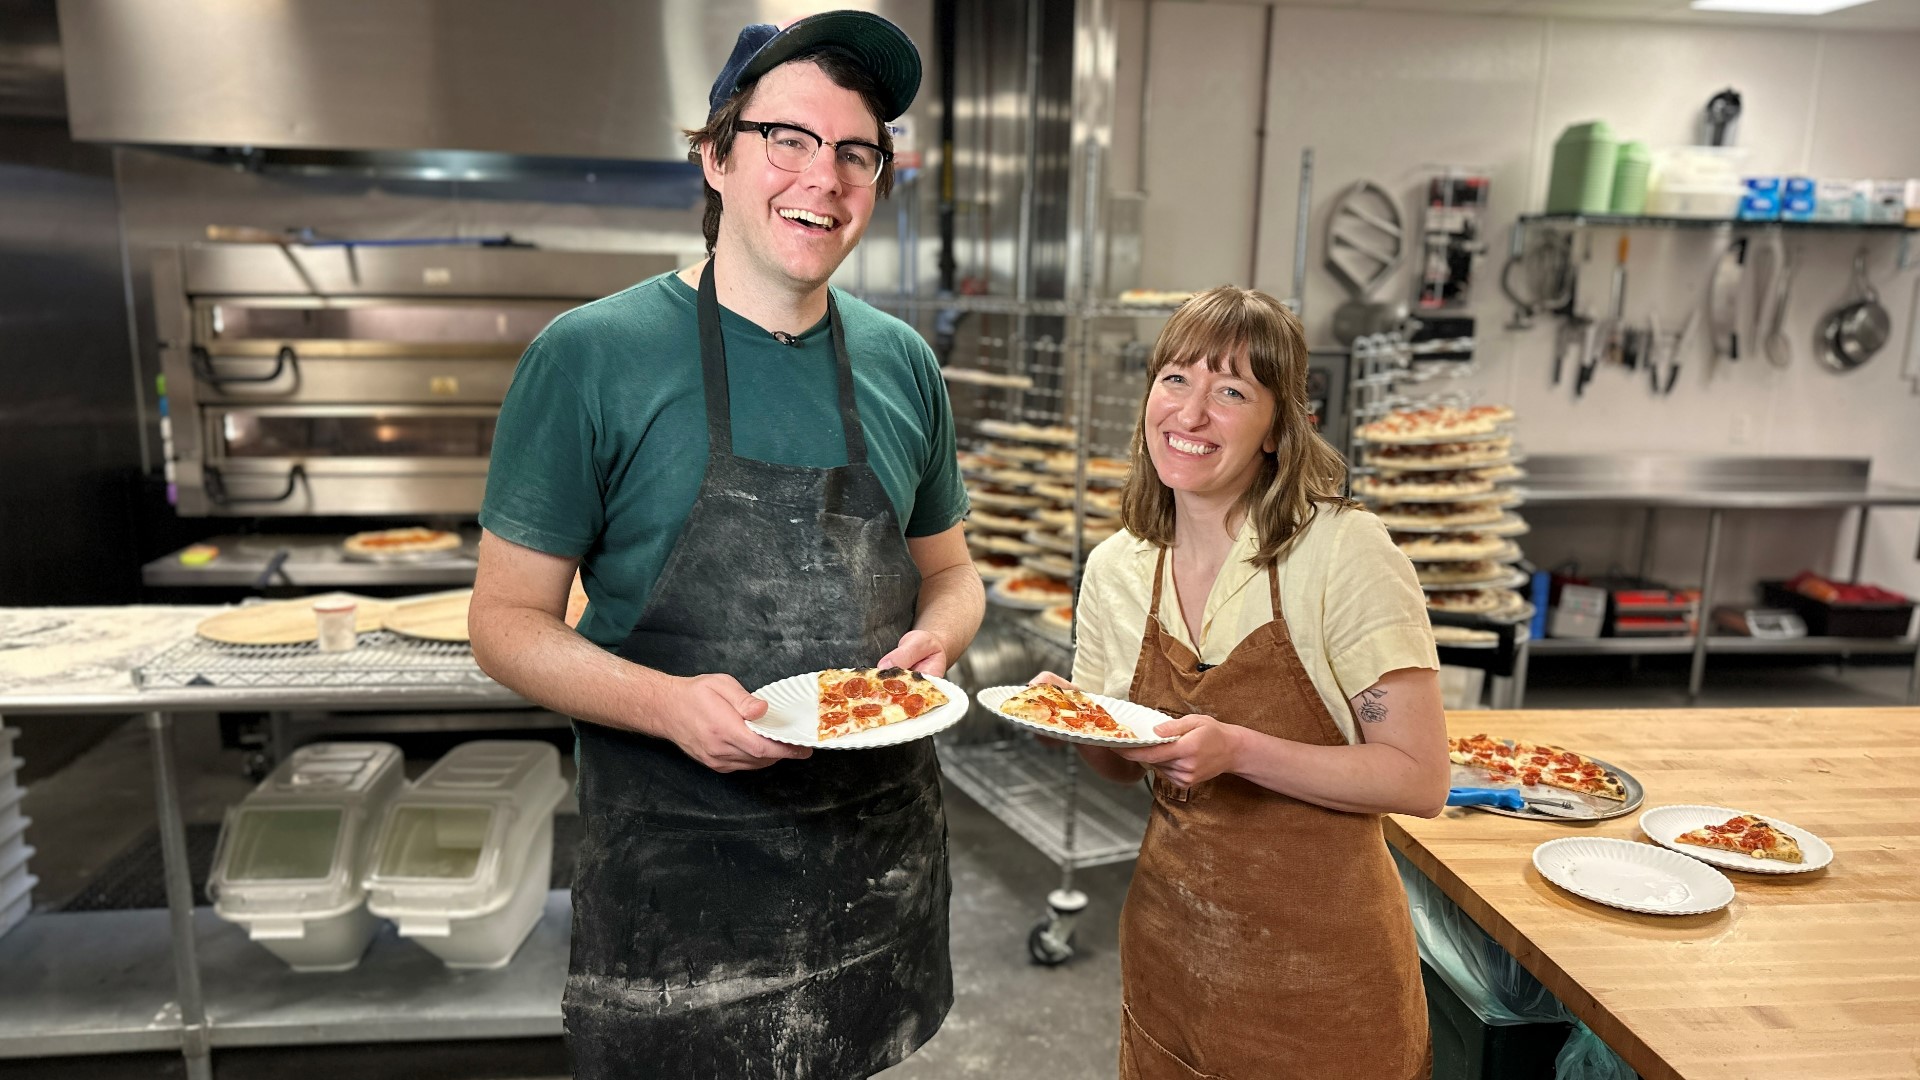 Good Luck Bread is run by a husband and wife team who are proving frozen pizza can be a premium dinner option. #k5evening